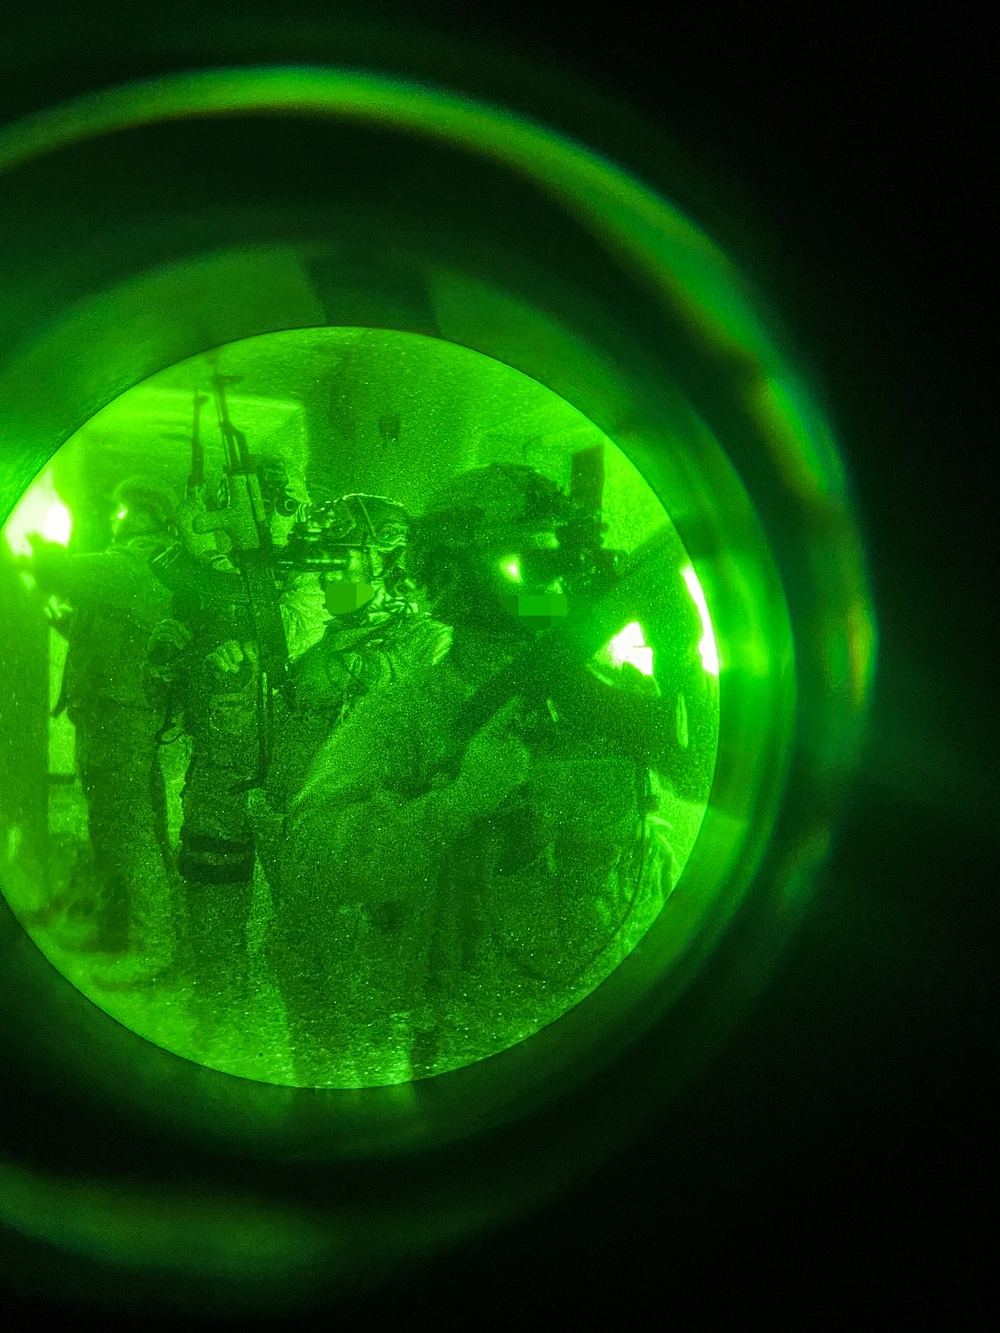 NATO Allies participate in joint close quarters-battle night exercise during Trojan Footprint 24